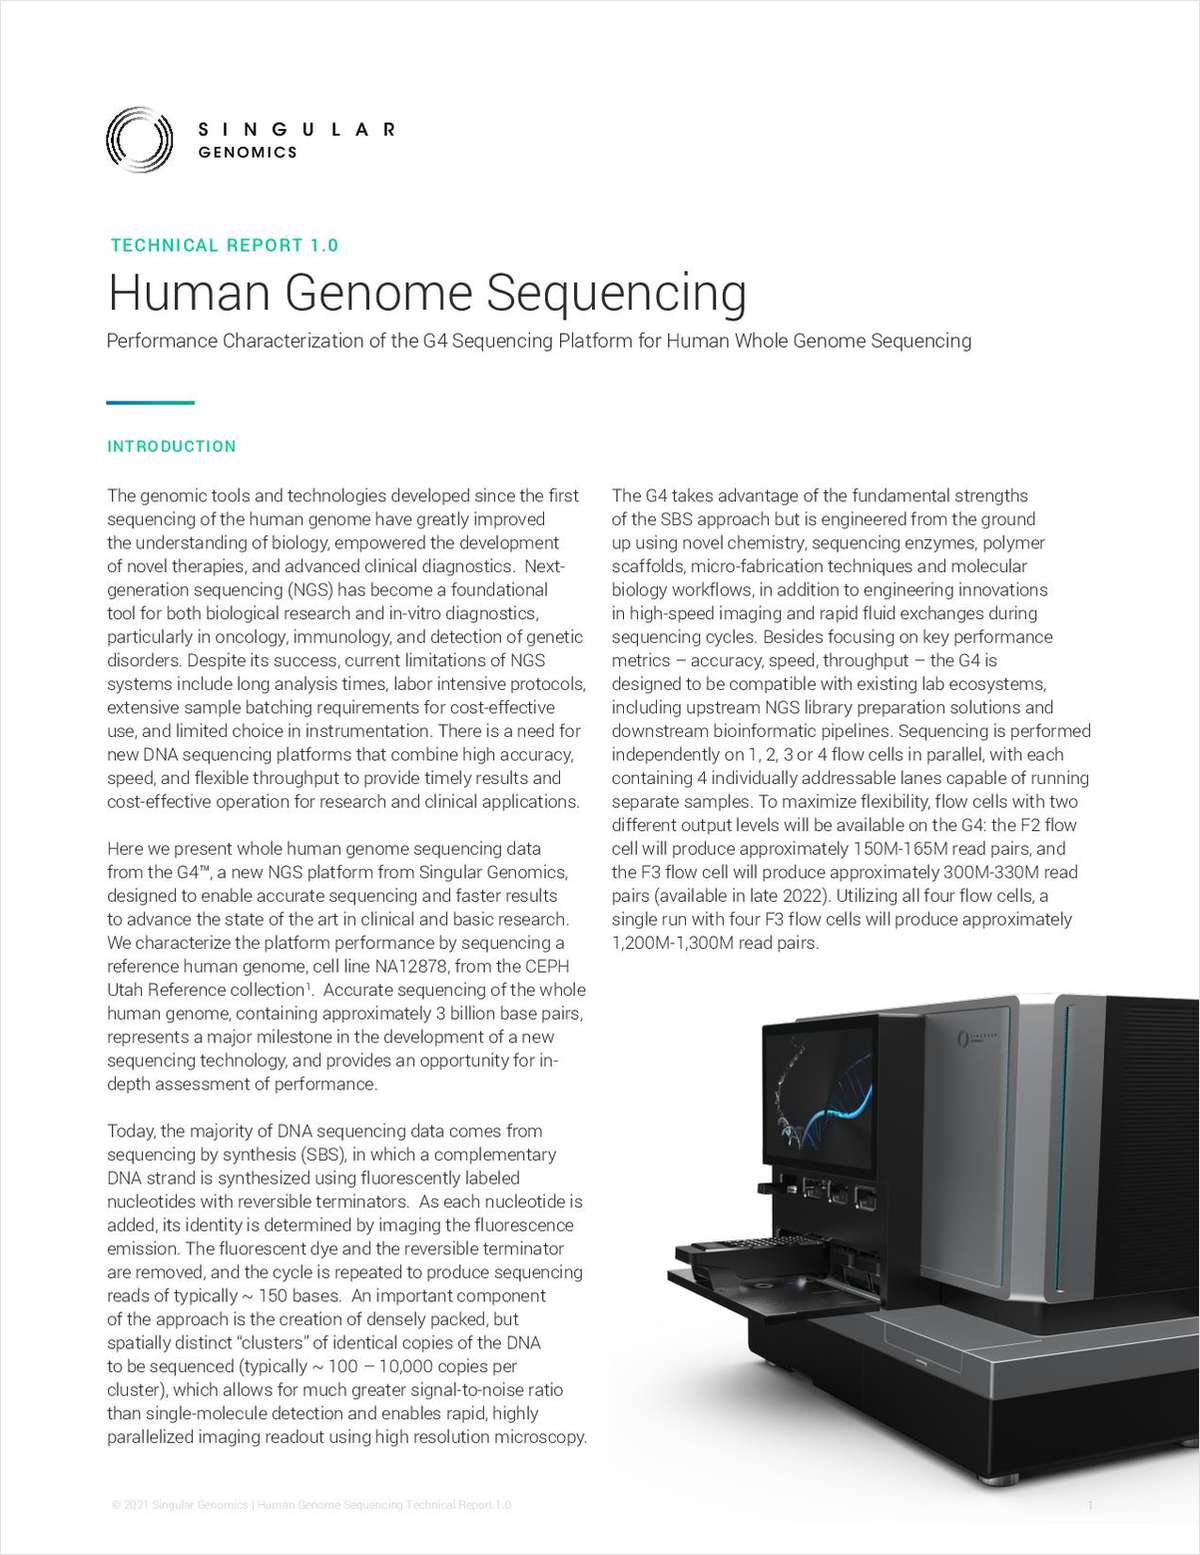 Performance Characterization of the G4 Sequencing Platform for Human Whole-Genome Sequencing